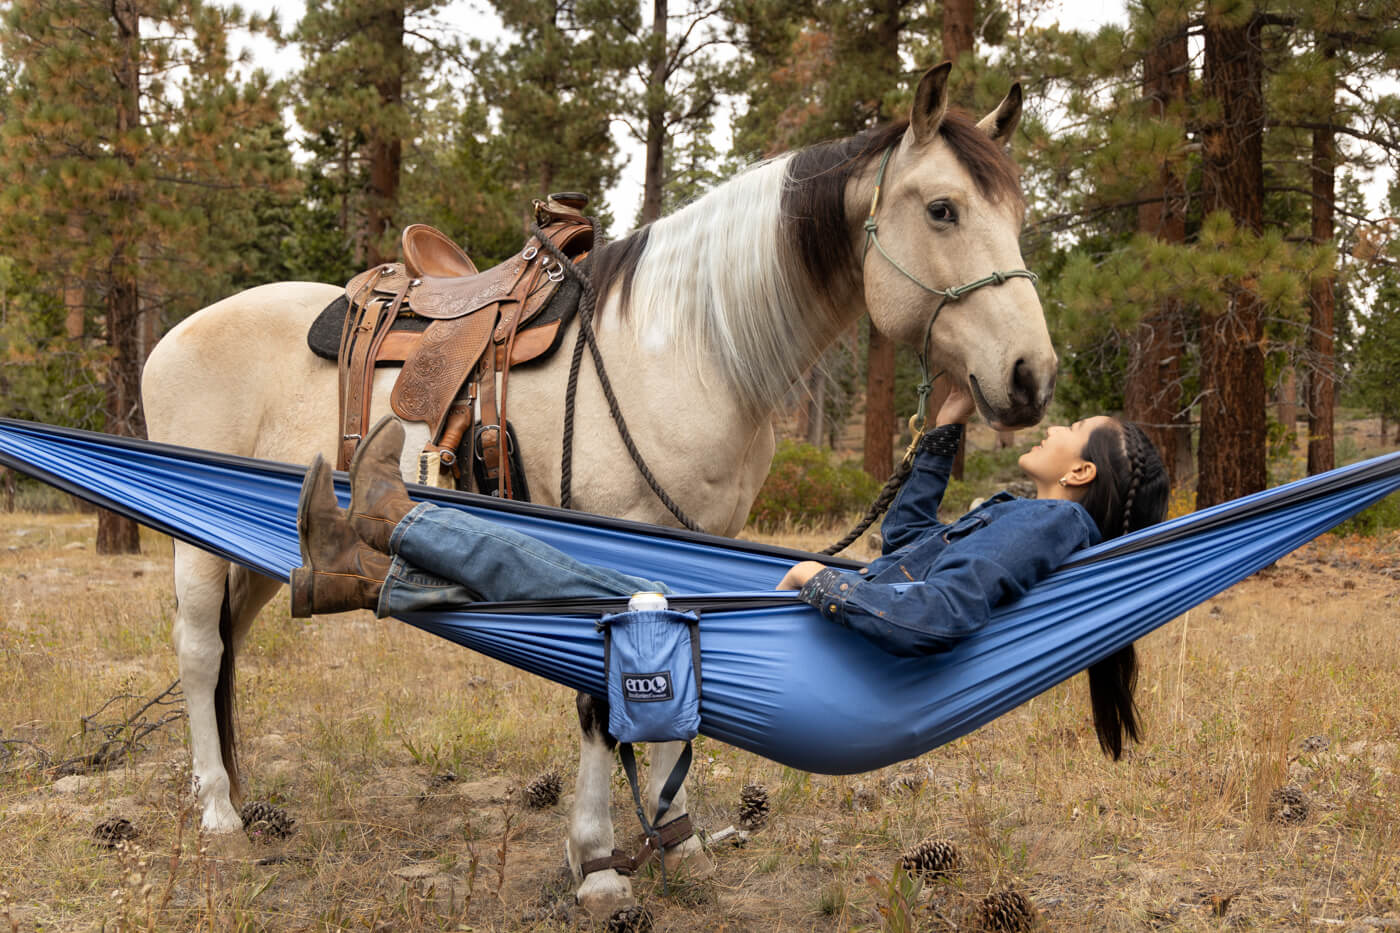 3 Things to Consider Before Hammocking With Your Horse